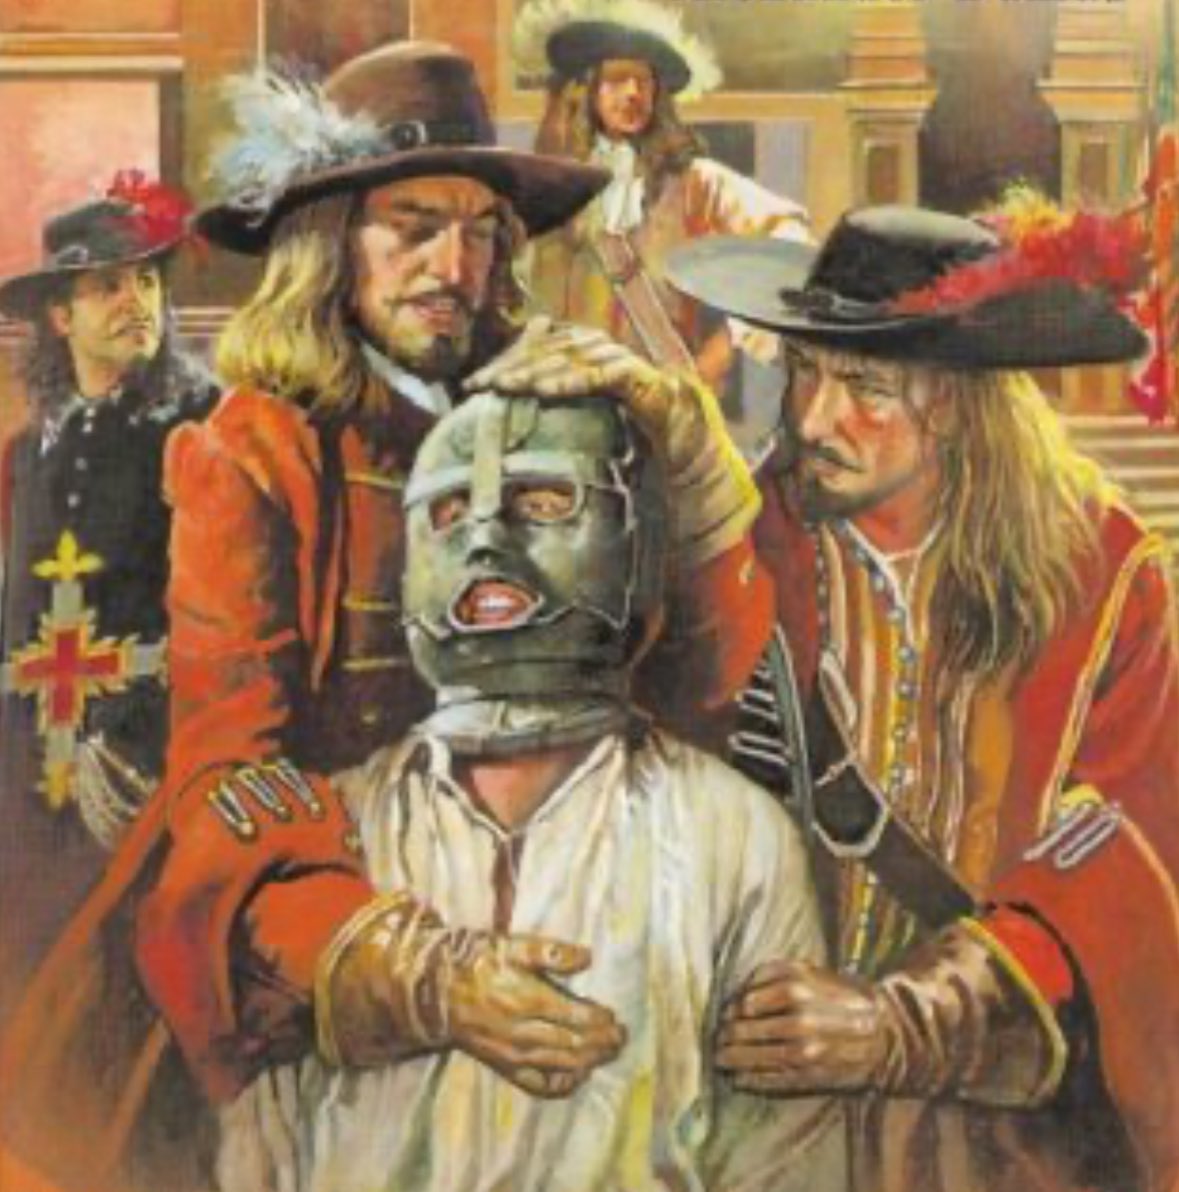 Tomorrow’s episode of @TheRestHistory is on THE MAN IN THE IRON MASK